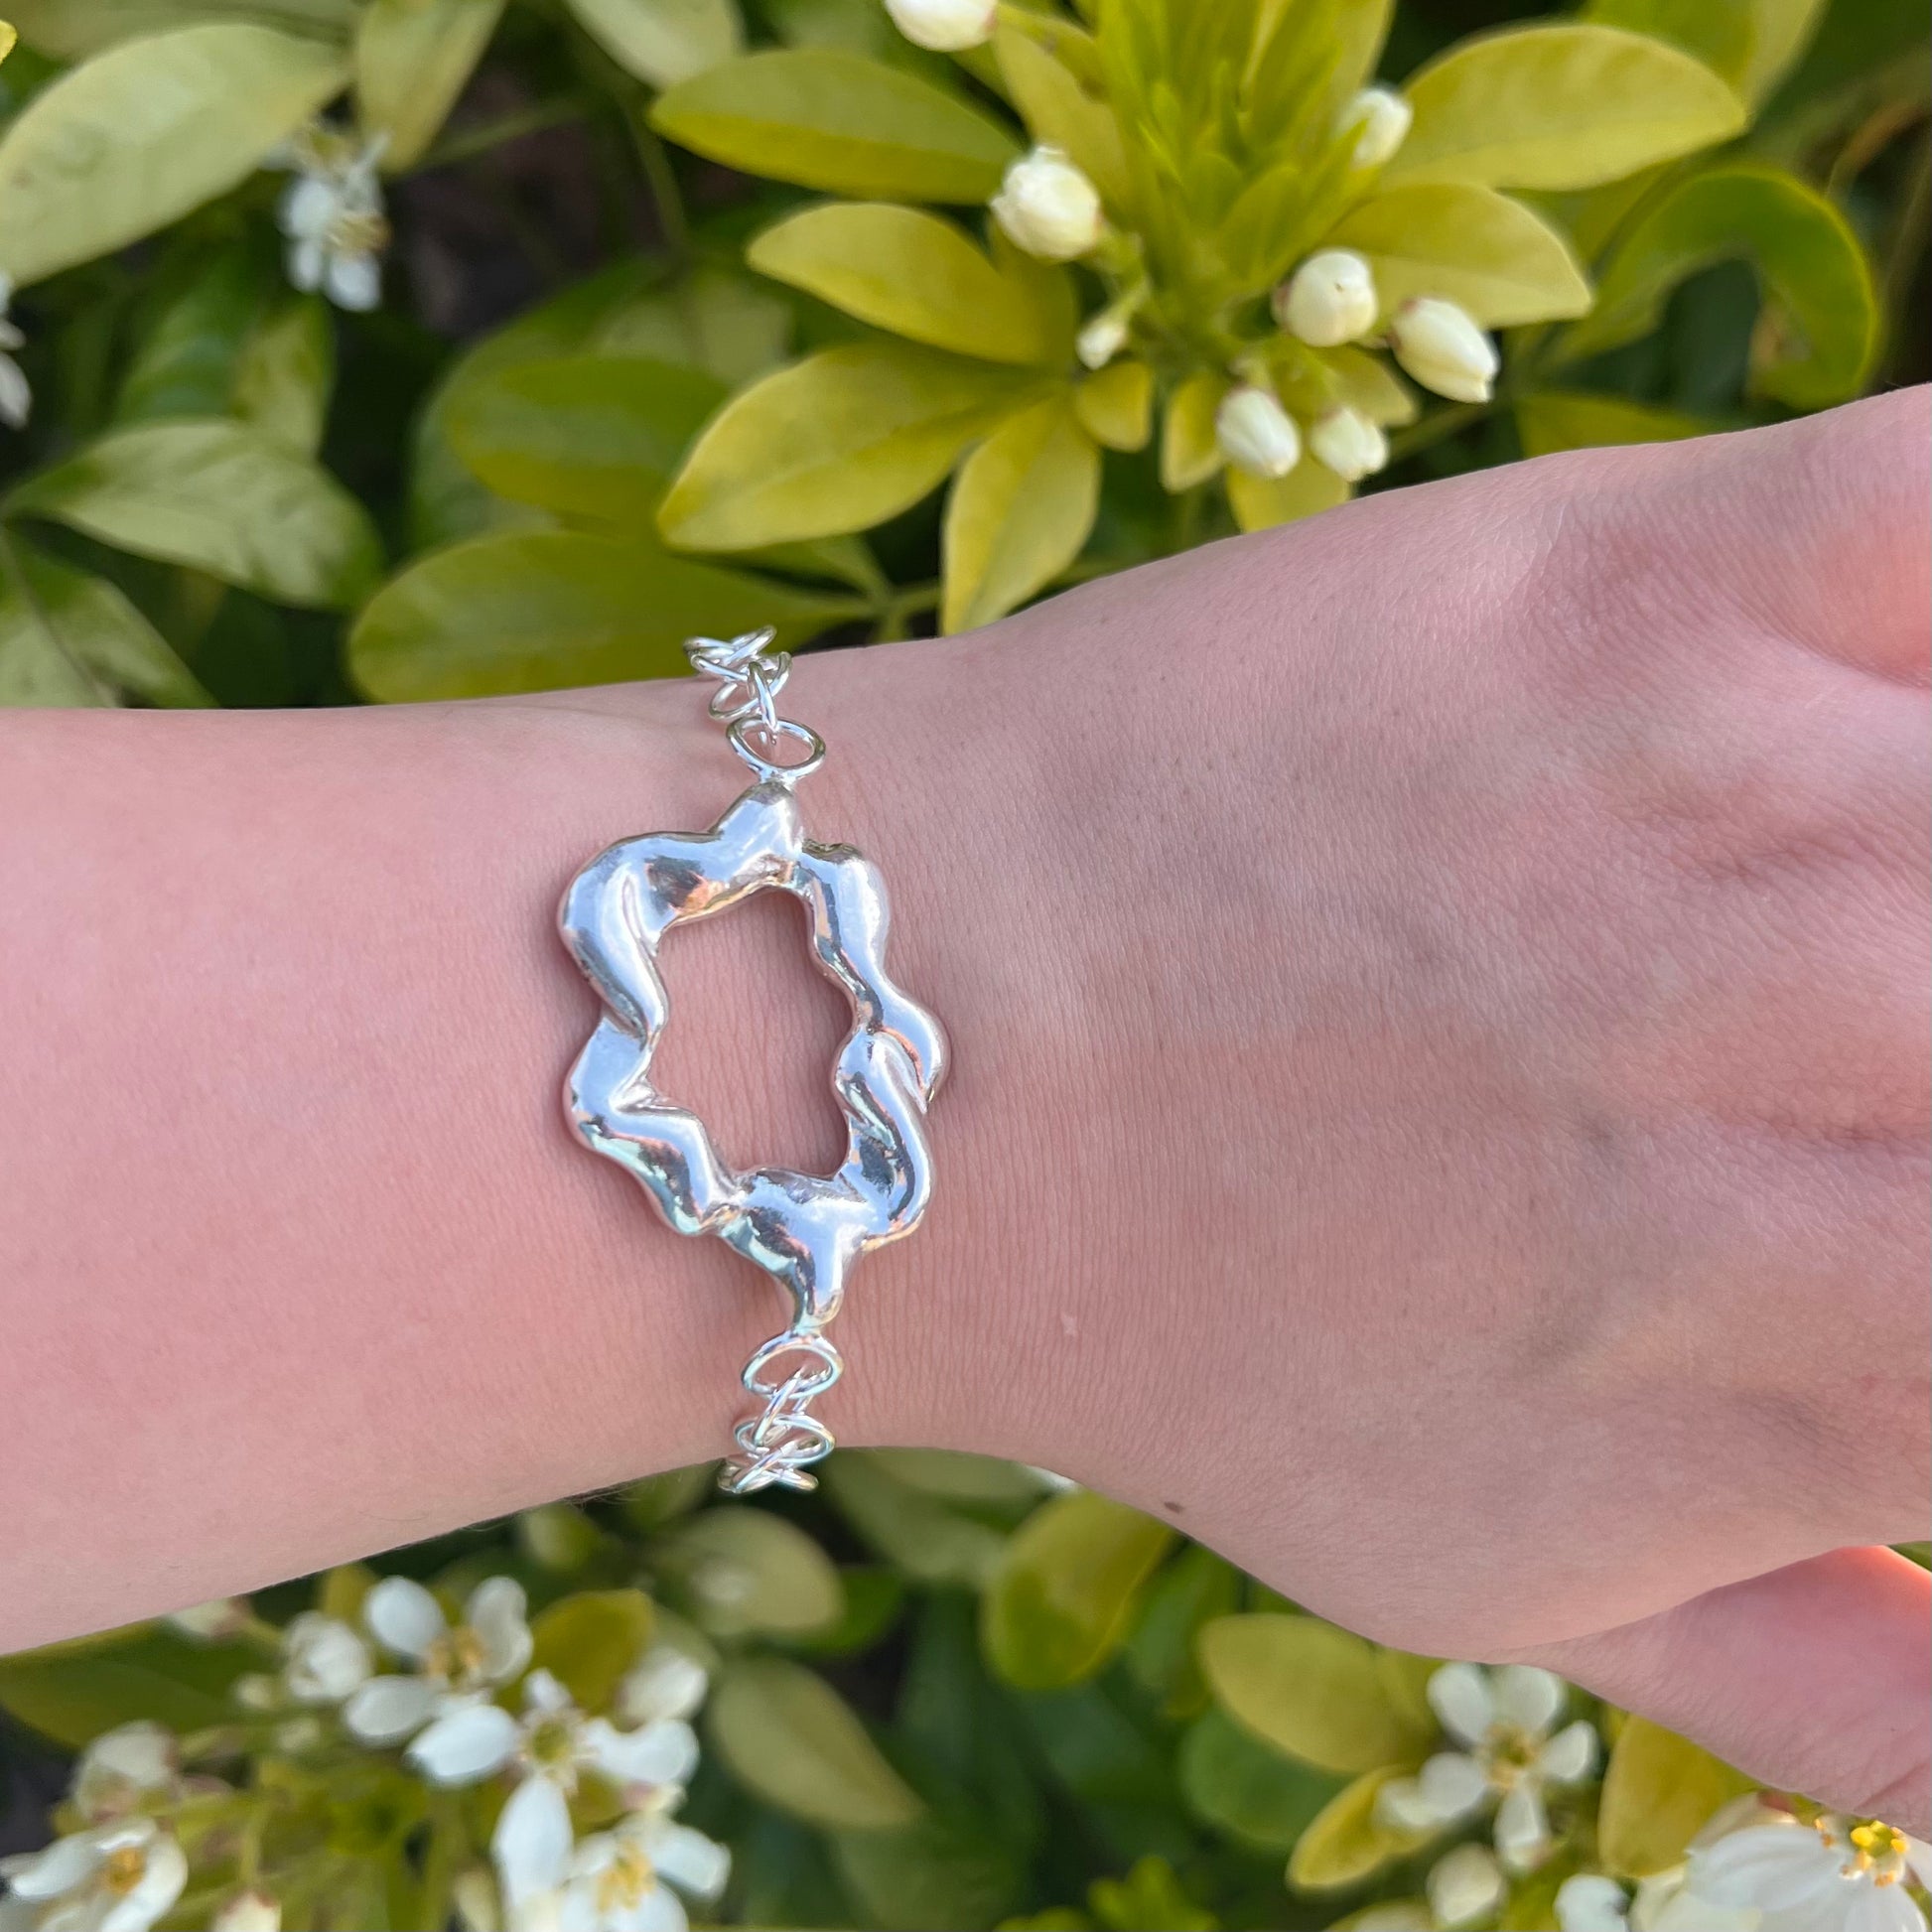 A chunky sterling silver bracelet on a wrist. The centrepiece of the bracelet is shaped like a cloud and the background is of a green shrub with white flowers.